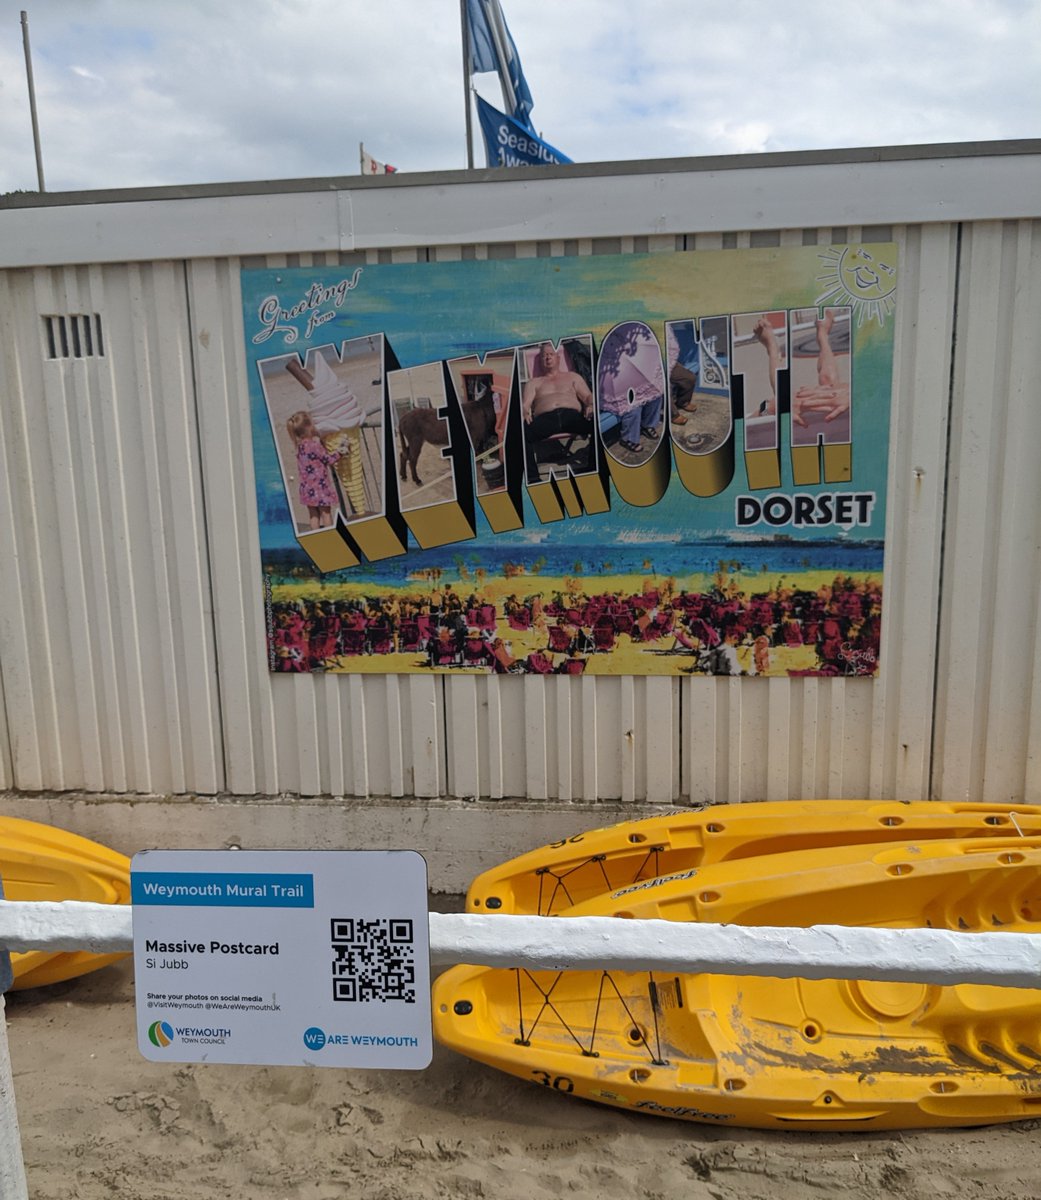 🖼️ Have you discovered #WeymouthMuralTrail yet? 🗺️ Complete the trail in one go, explore in stages, or do it all over again – it’s up to you! 📱 Find out more about each artwork by scanning the QR codes - you can find these near to each mural. #VisitWeymouth #WeAreWeymouth